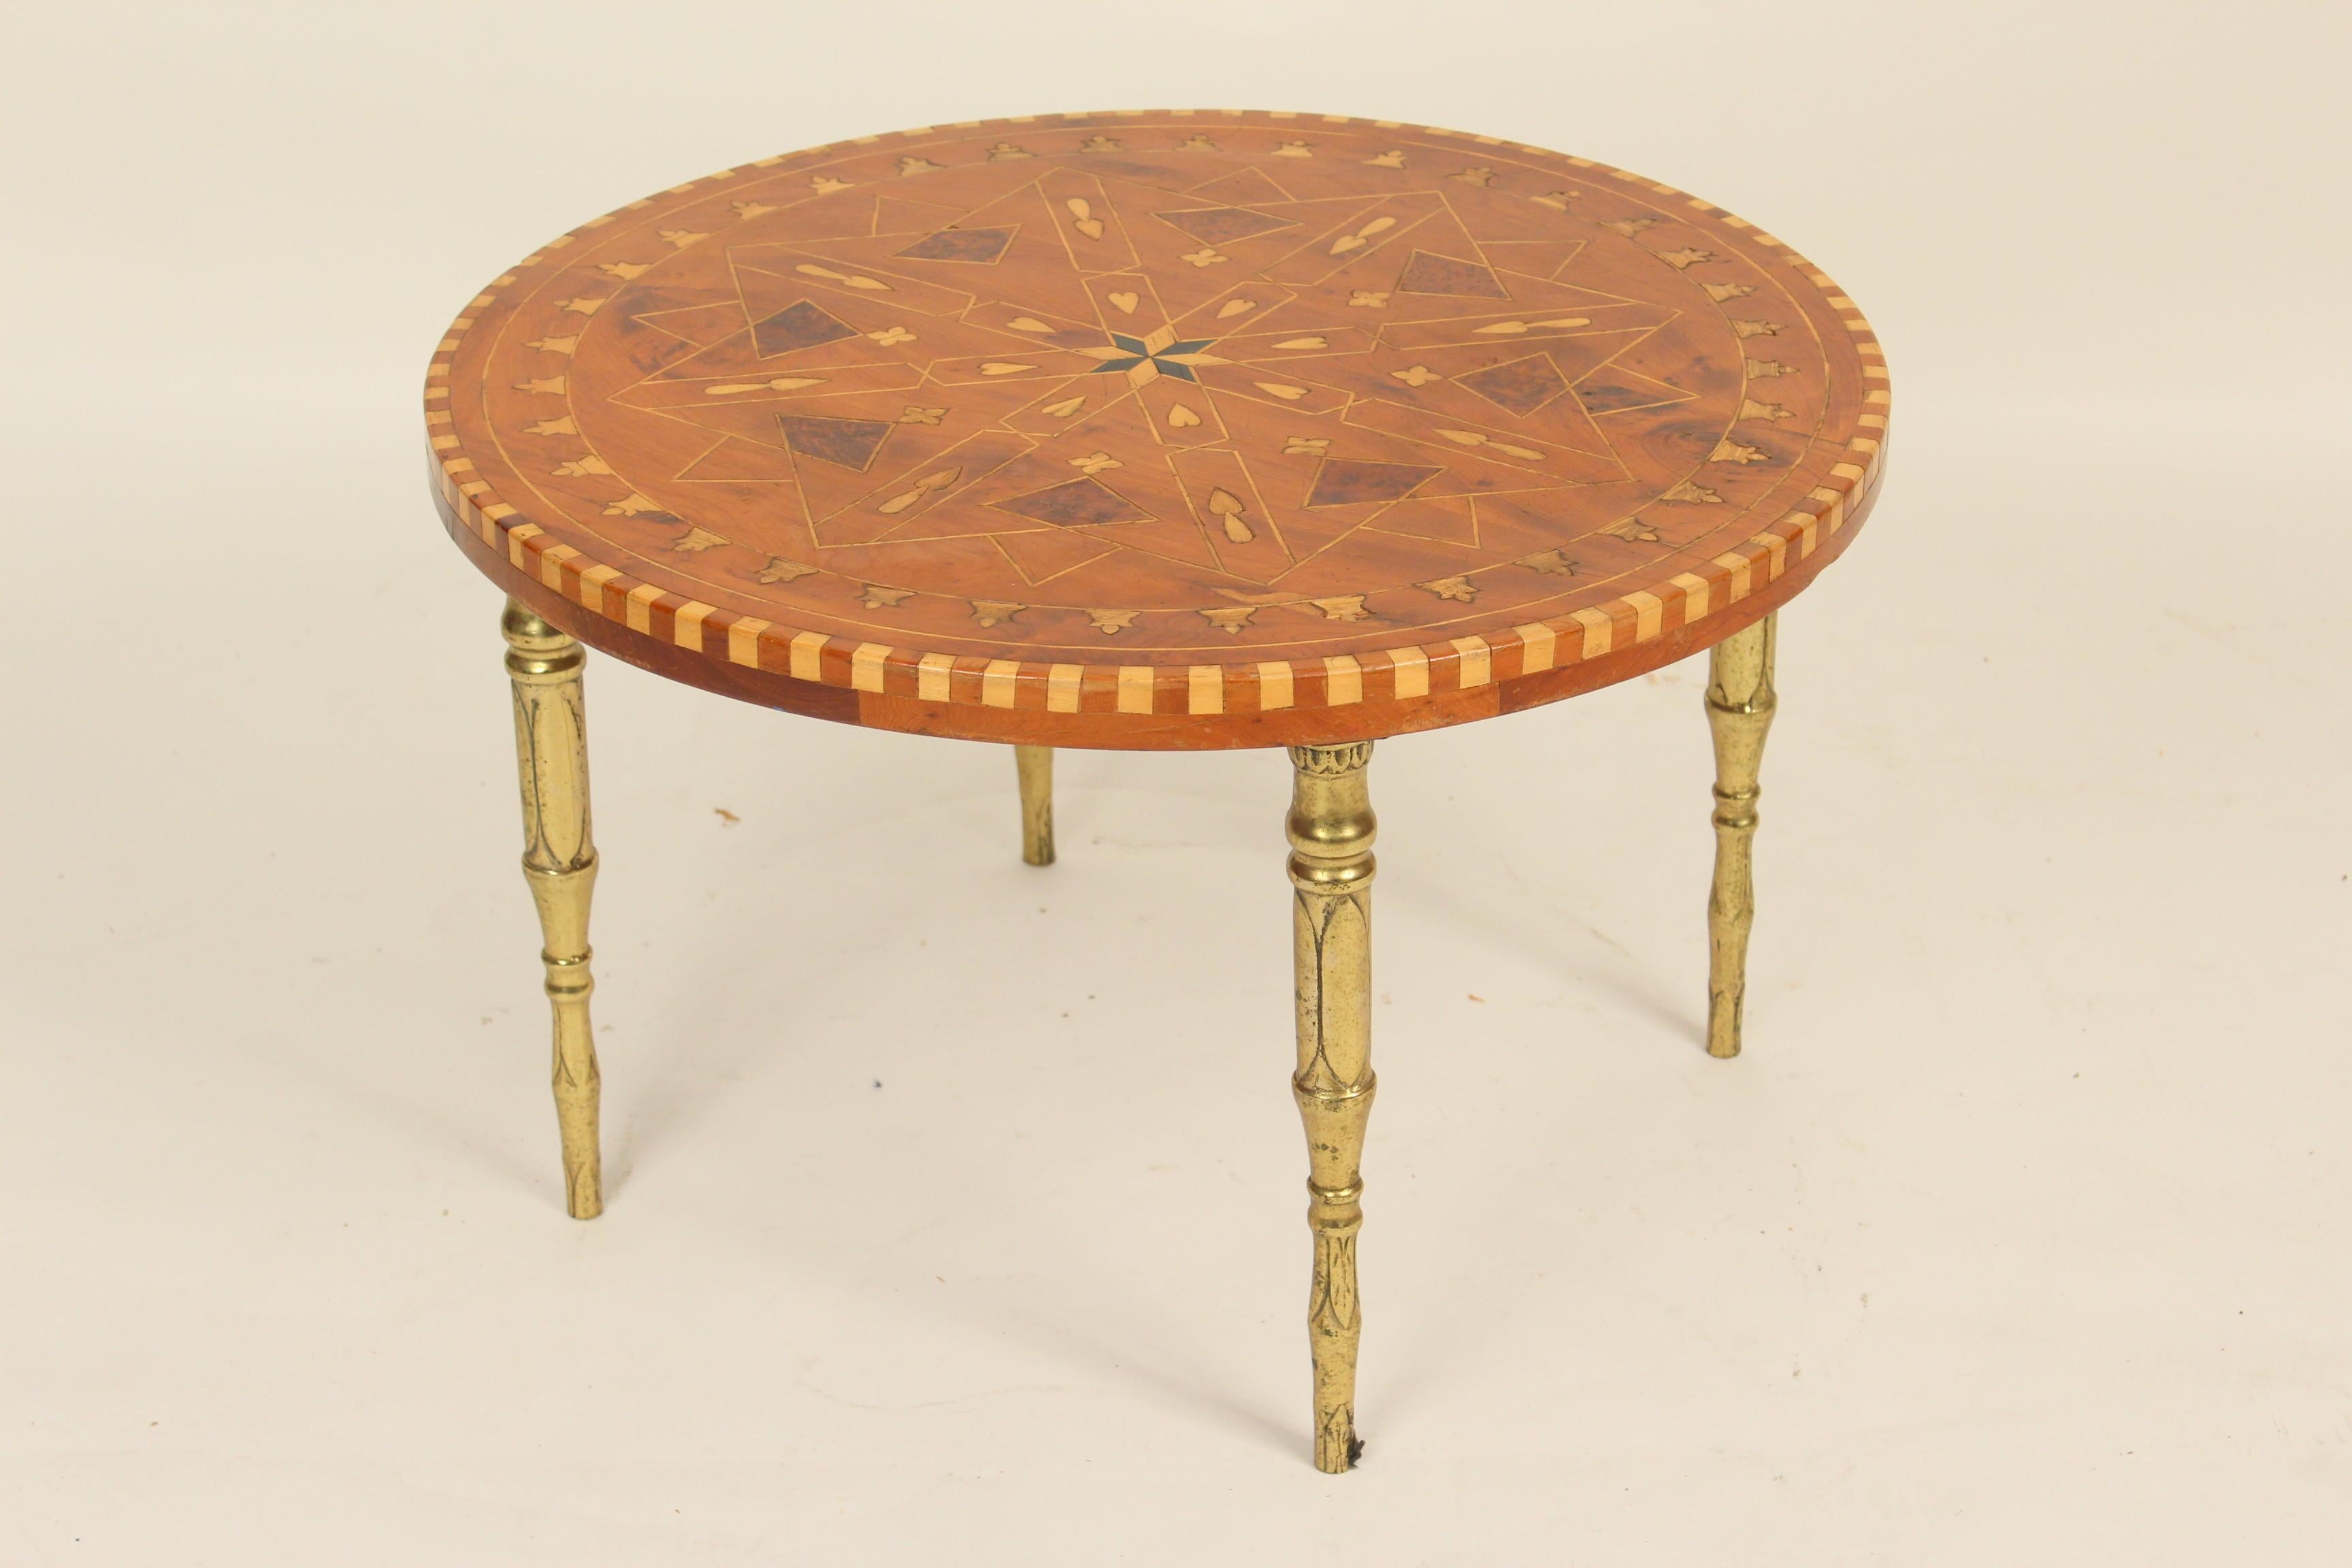 Middle Eastern style inlaid round occasional table with brass legs, mid-20th century. The bottom of the table is stencilled, 